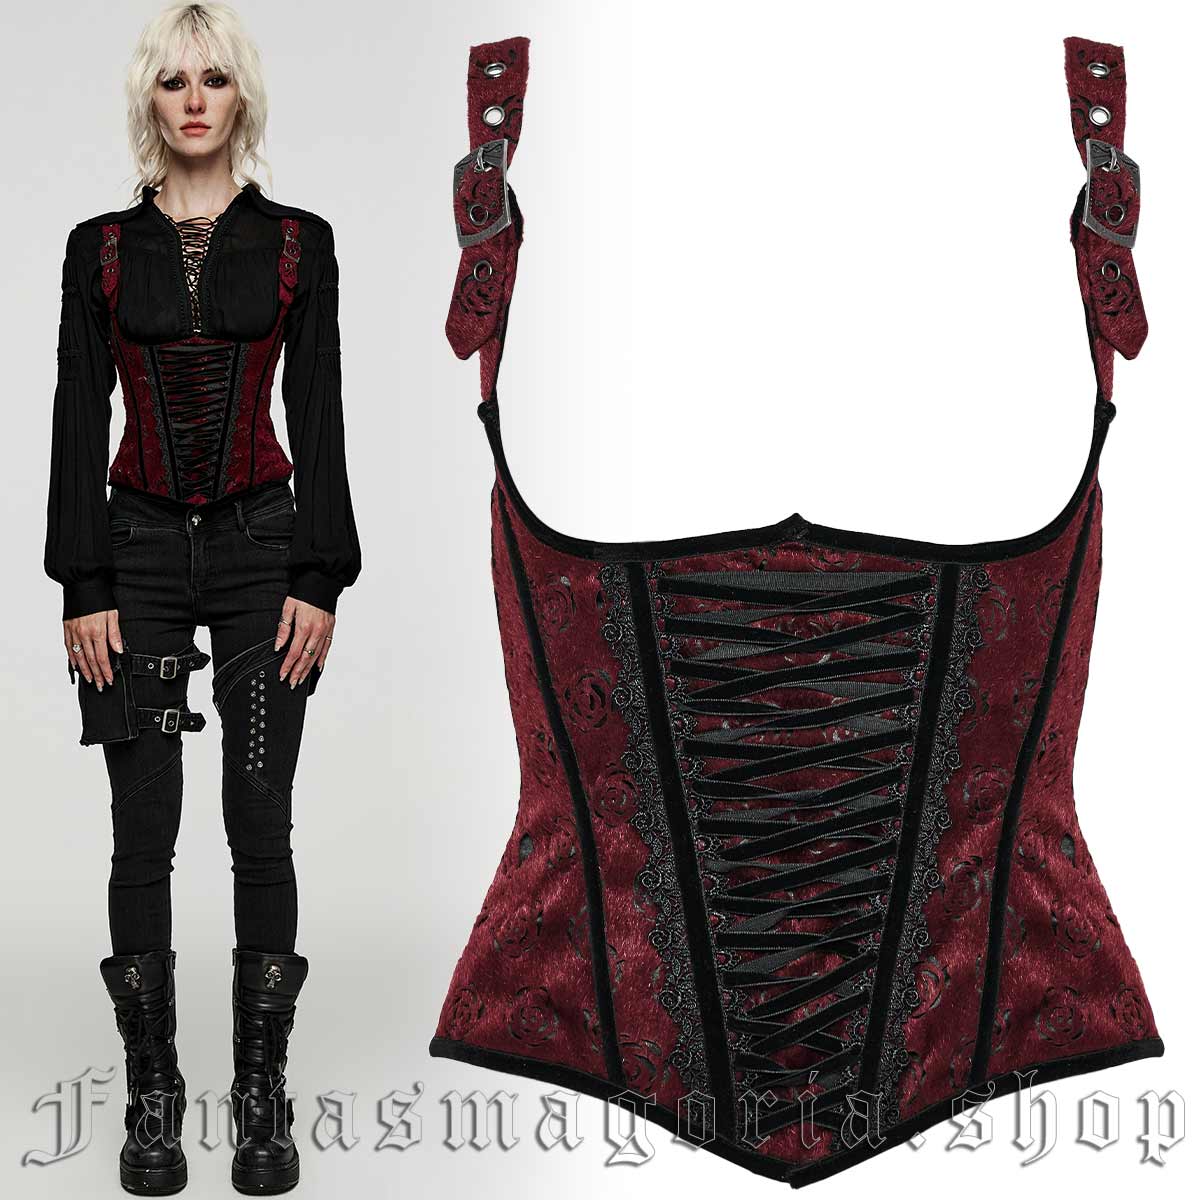 BRAND NEW Skull W/ roses &guns Tattoo Style Corset Top/Bustier LARGE